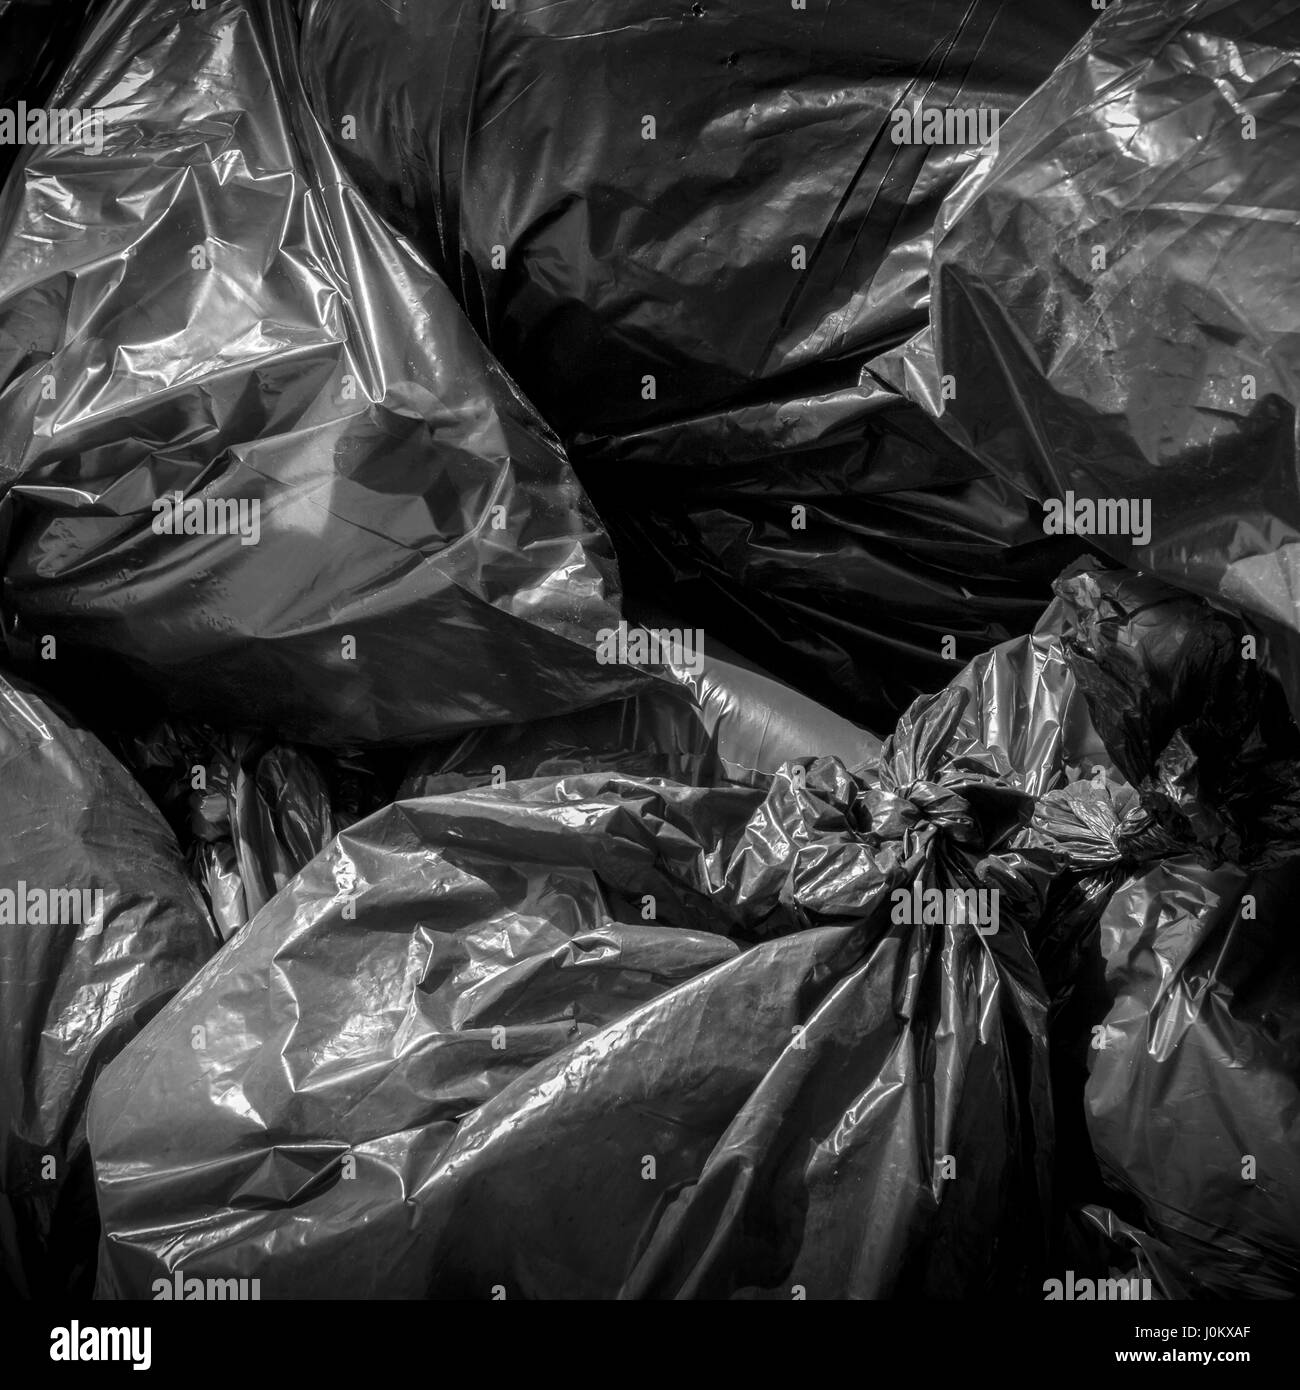 Textured of black plastic garbage bag for background Stock Photo